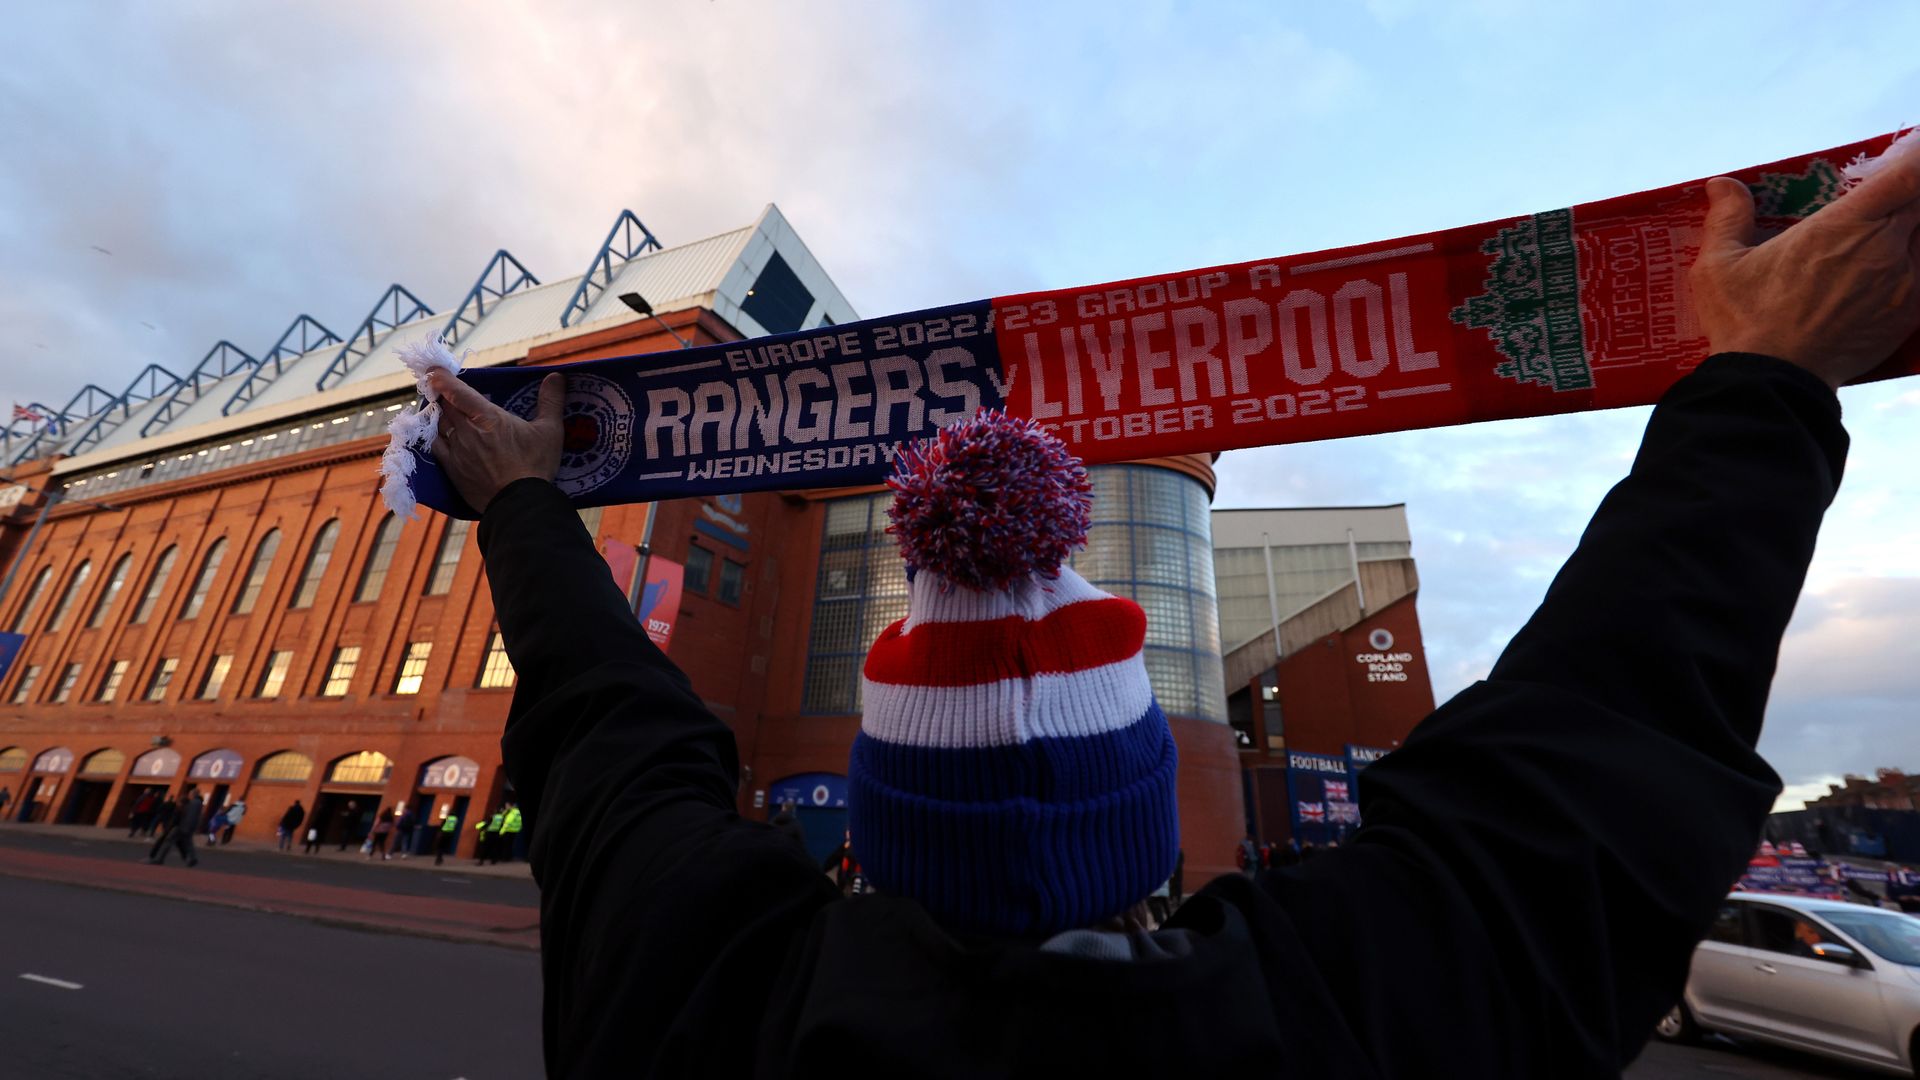 Salah, Jota benched for Liverpool at Rangers LIVE!